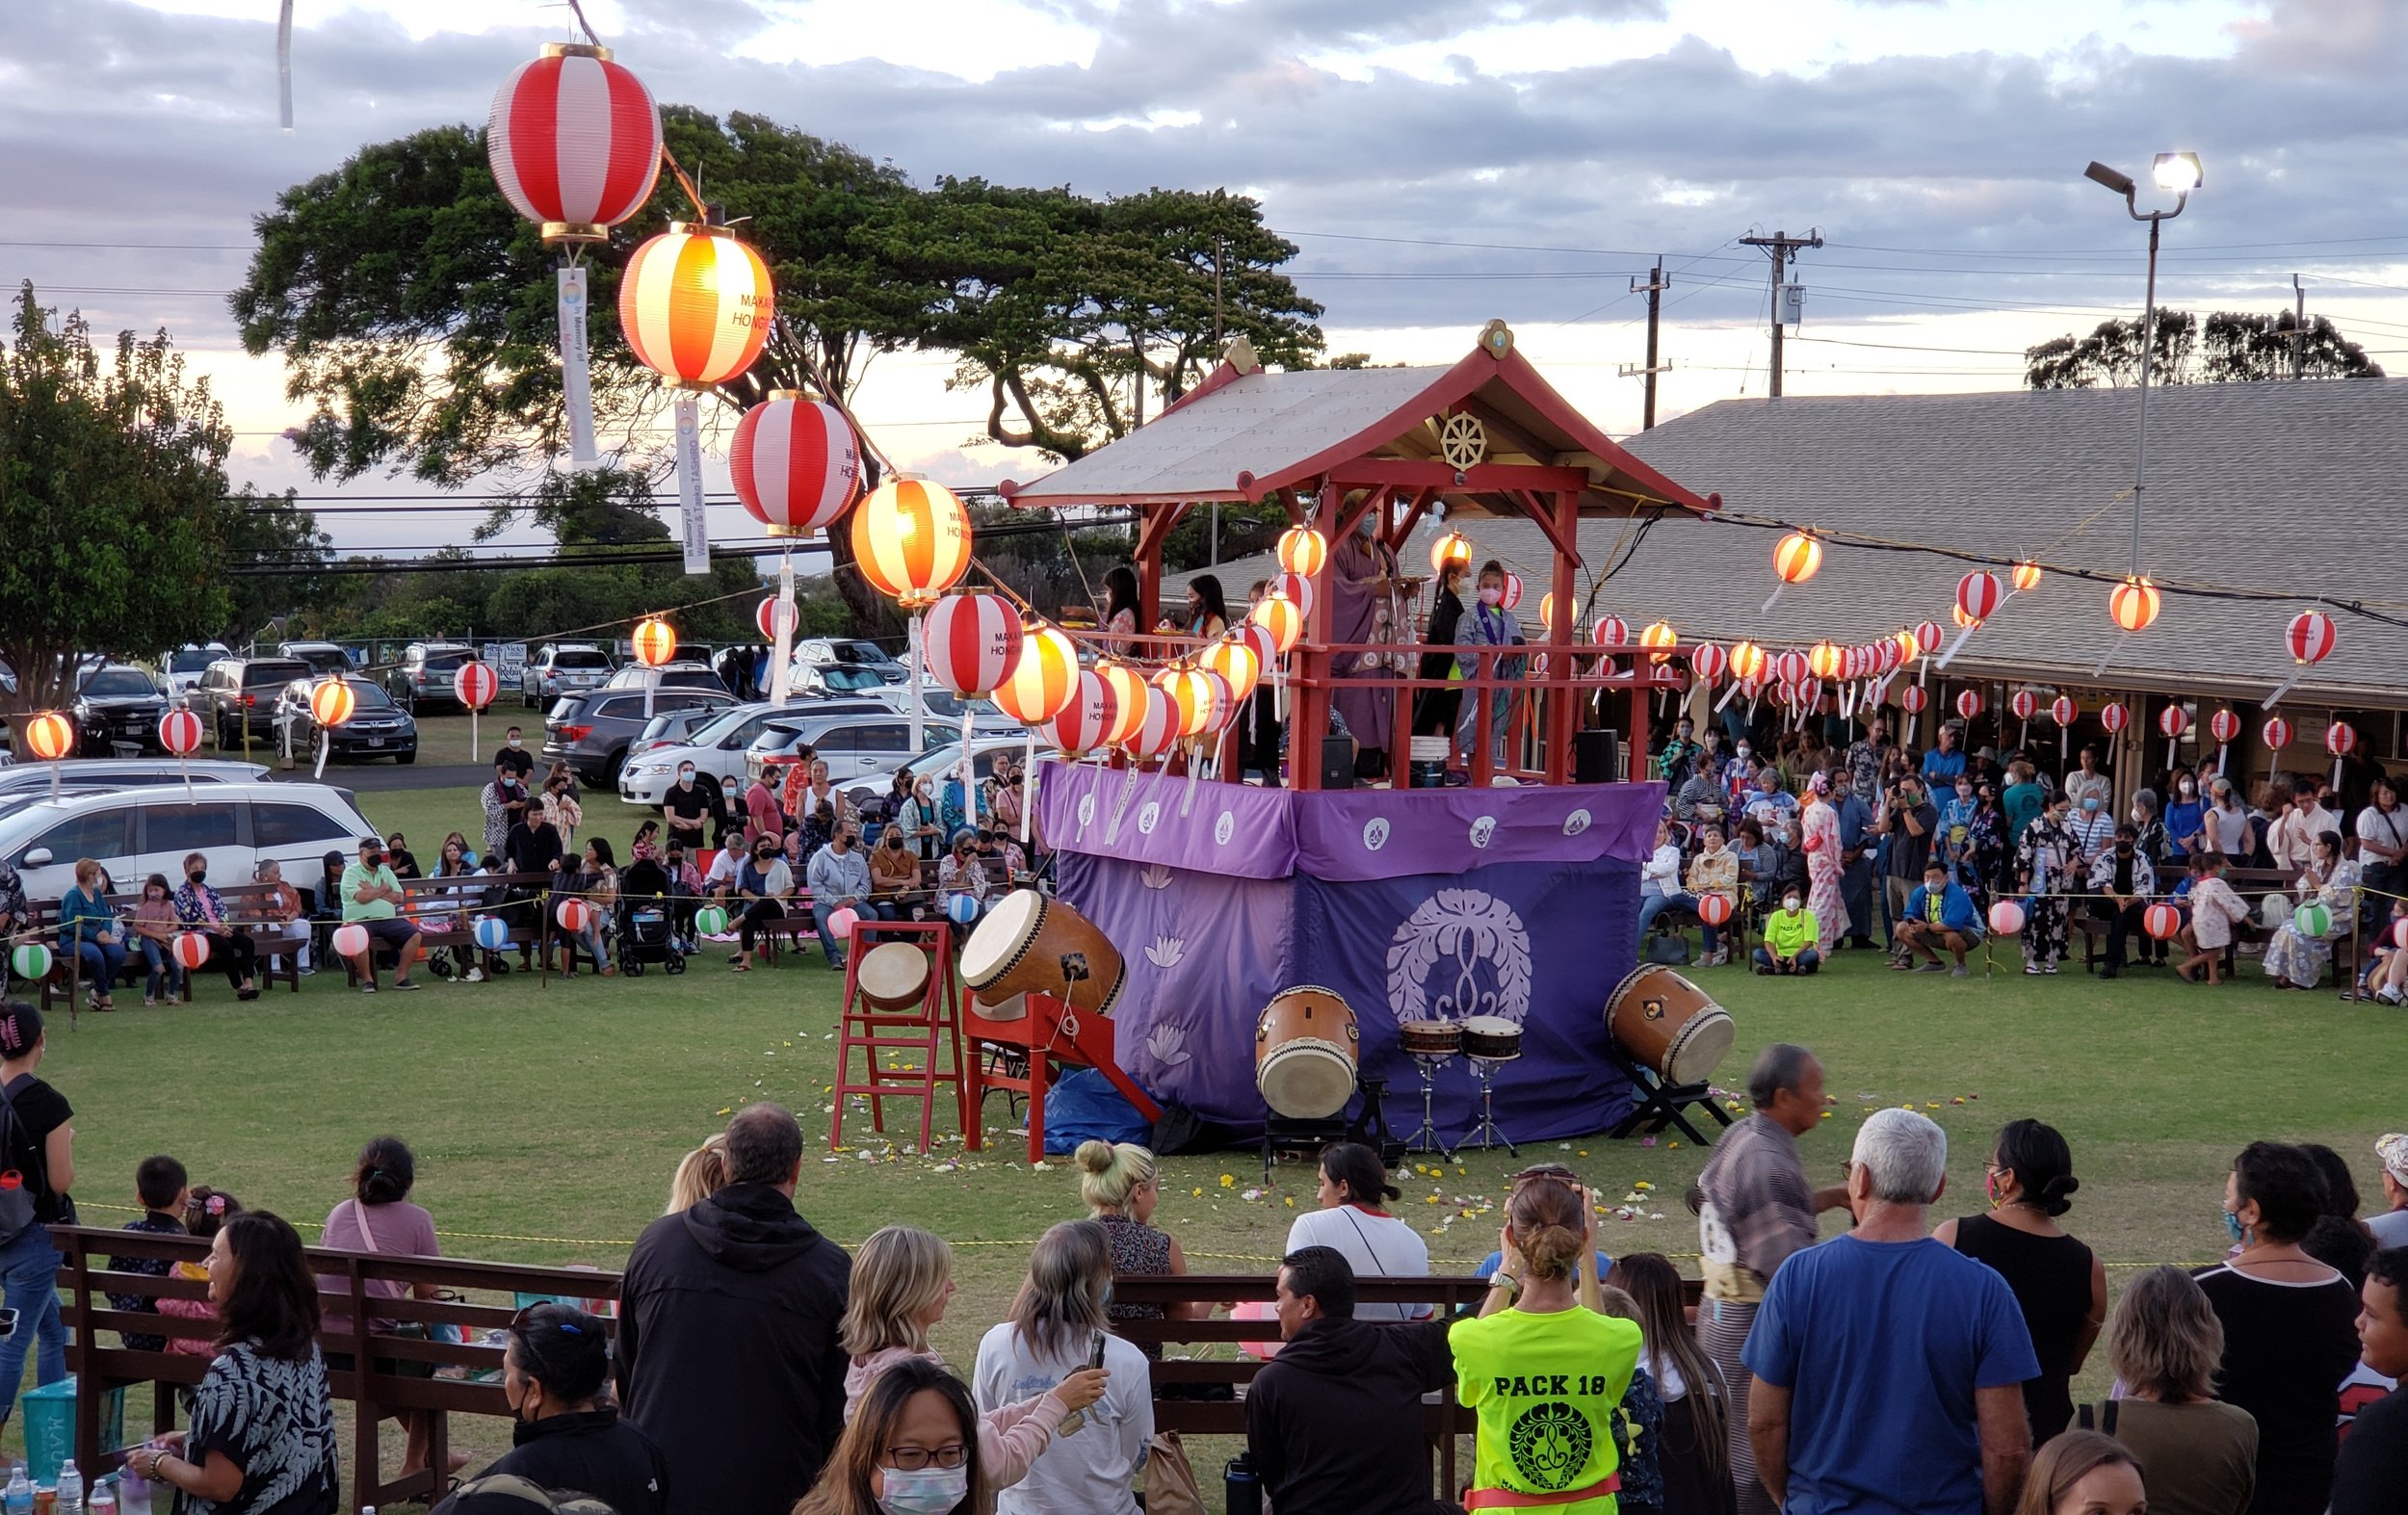   Maui Taiko will play during dancing.  